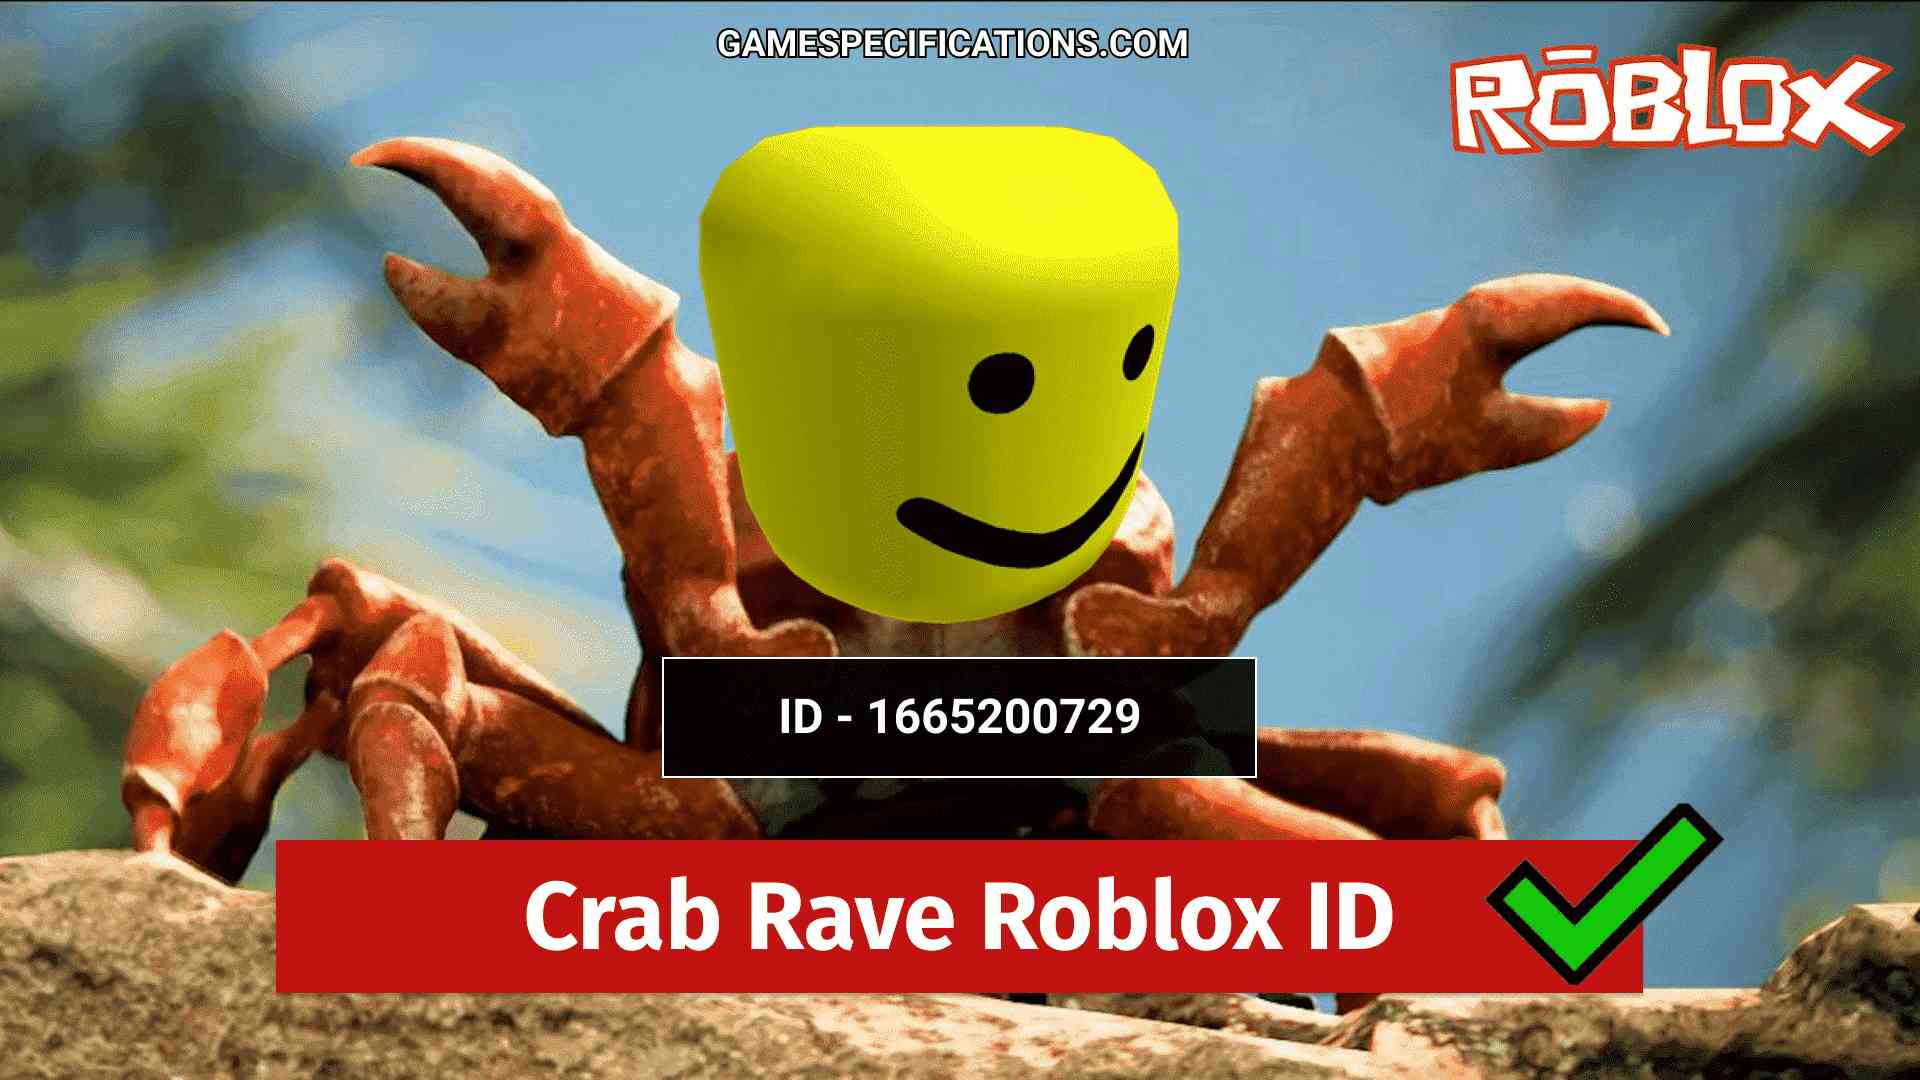 10 Best Crab Rave Roblox Id Codes Parody Remix Included Game Specifications - oof old town road roblox id